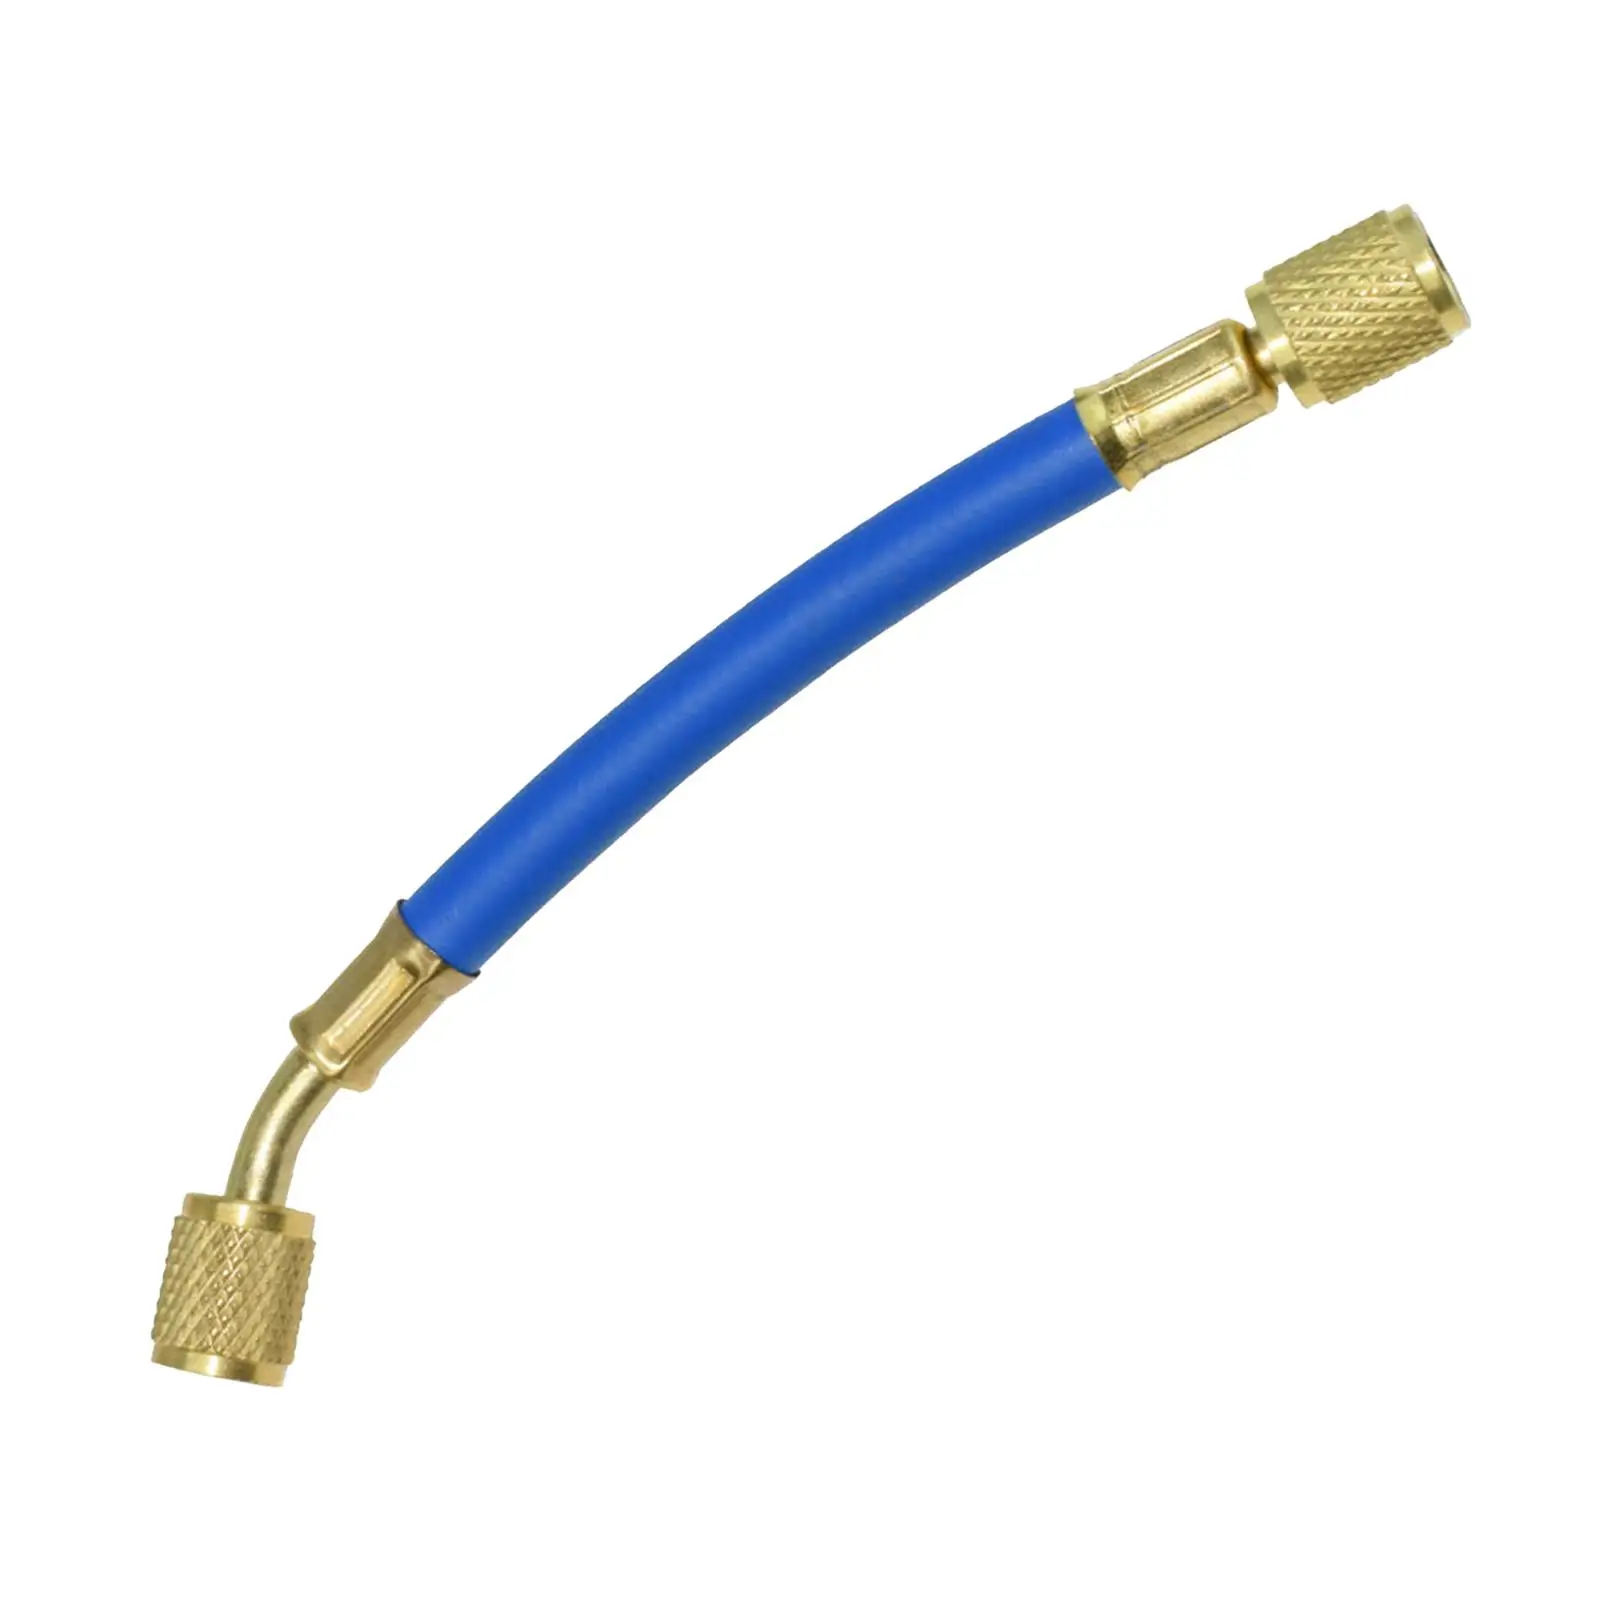 Auto Condensation Hoses Low Pressure Filler Coupler 1/4 inch Refrigerant AC Condensing R12 R22 for Car Motorcycle Truck